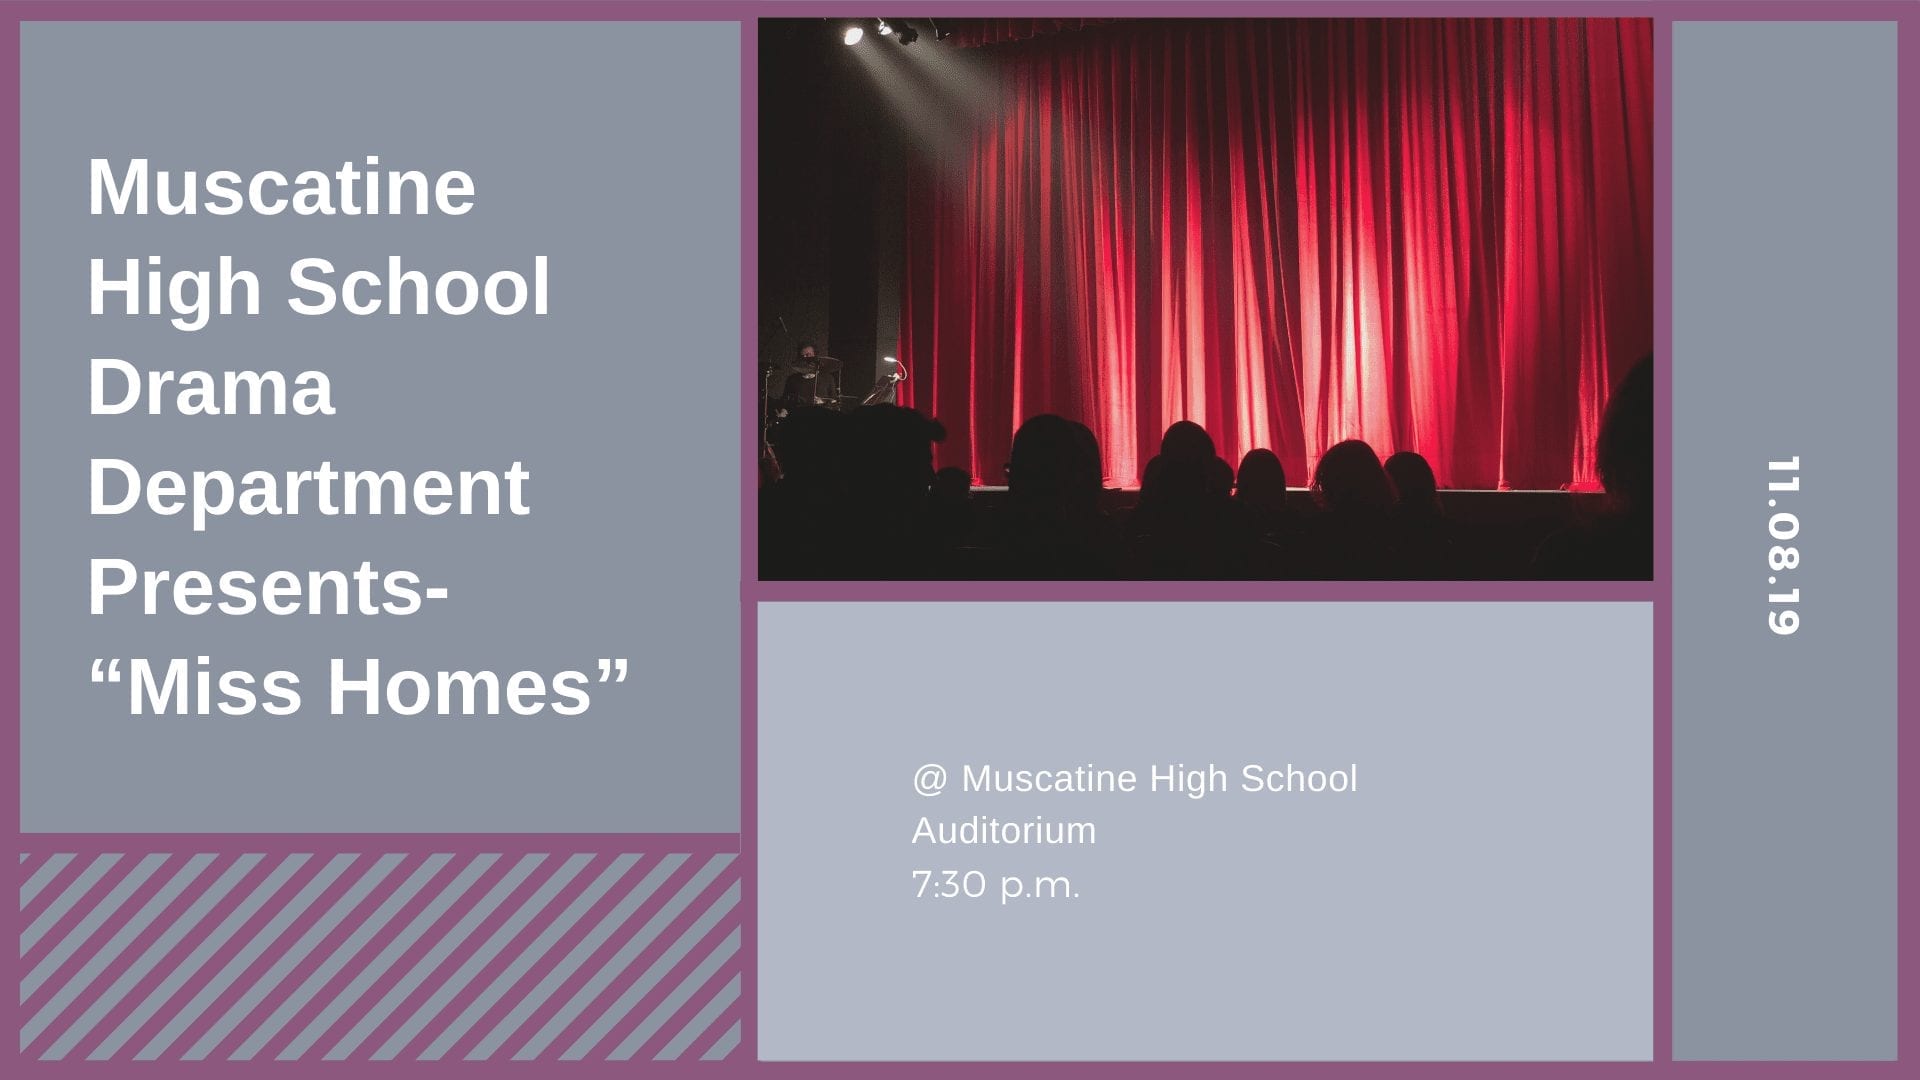 Muscatine High School Drama Department Presents- “Miss Homes”